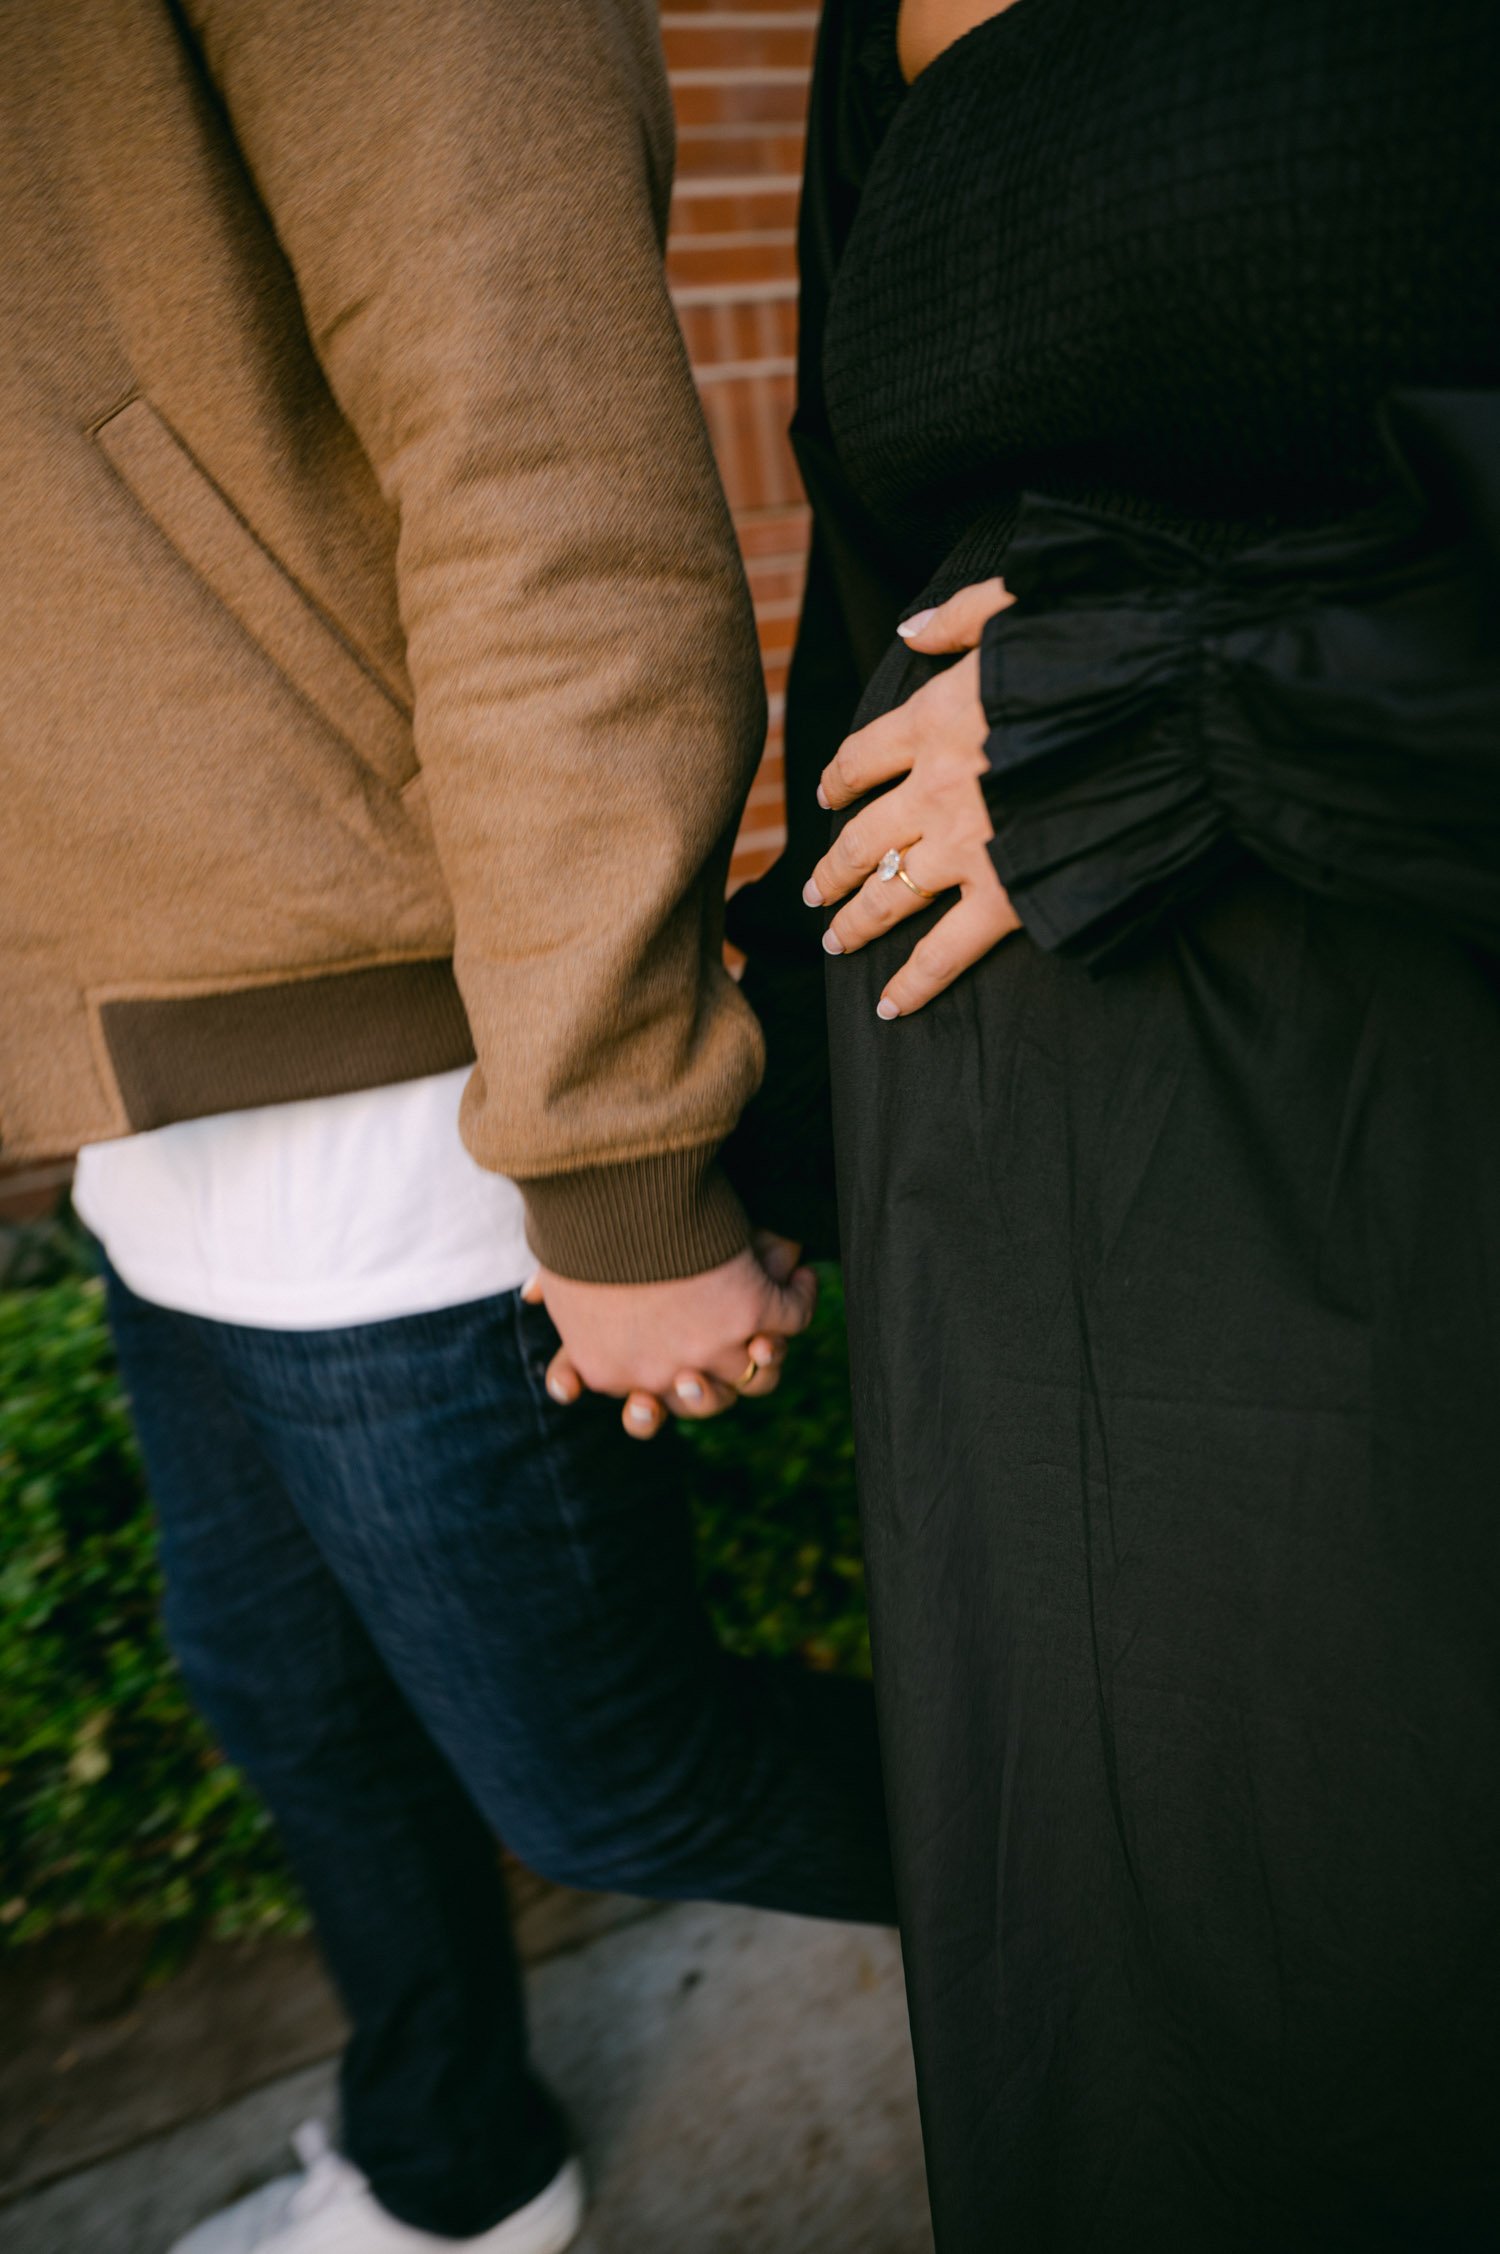 san francisco maternity session, photo of couple holding hands. mom is wearing a black dress with white tennis shoes and dad is wearing a tan jacket